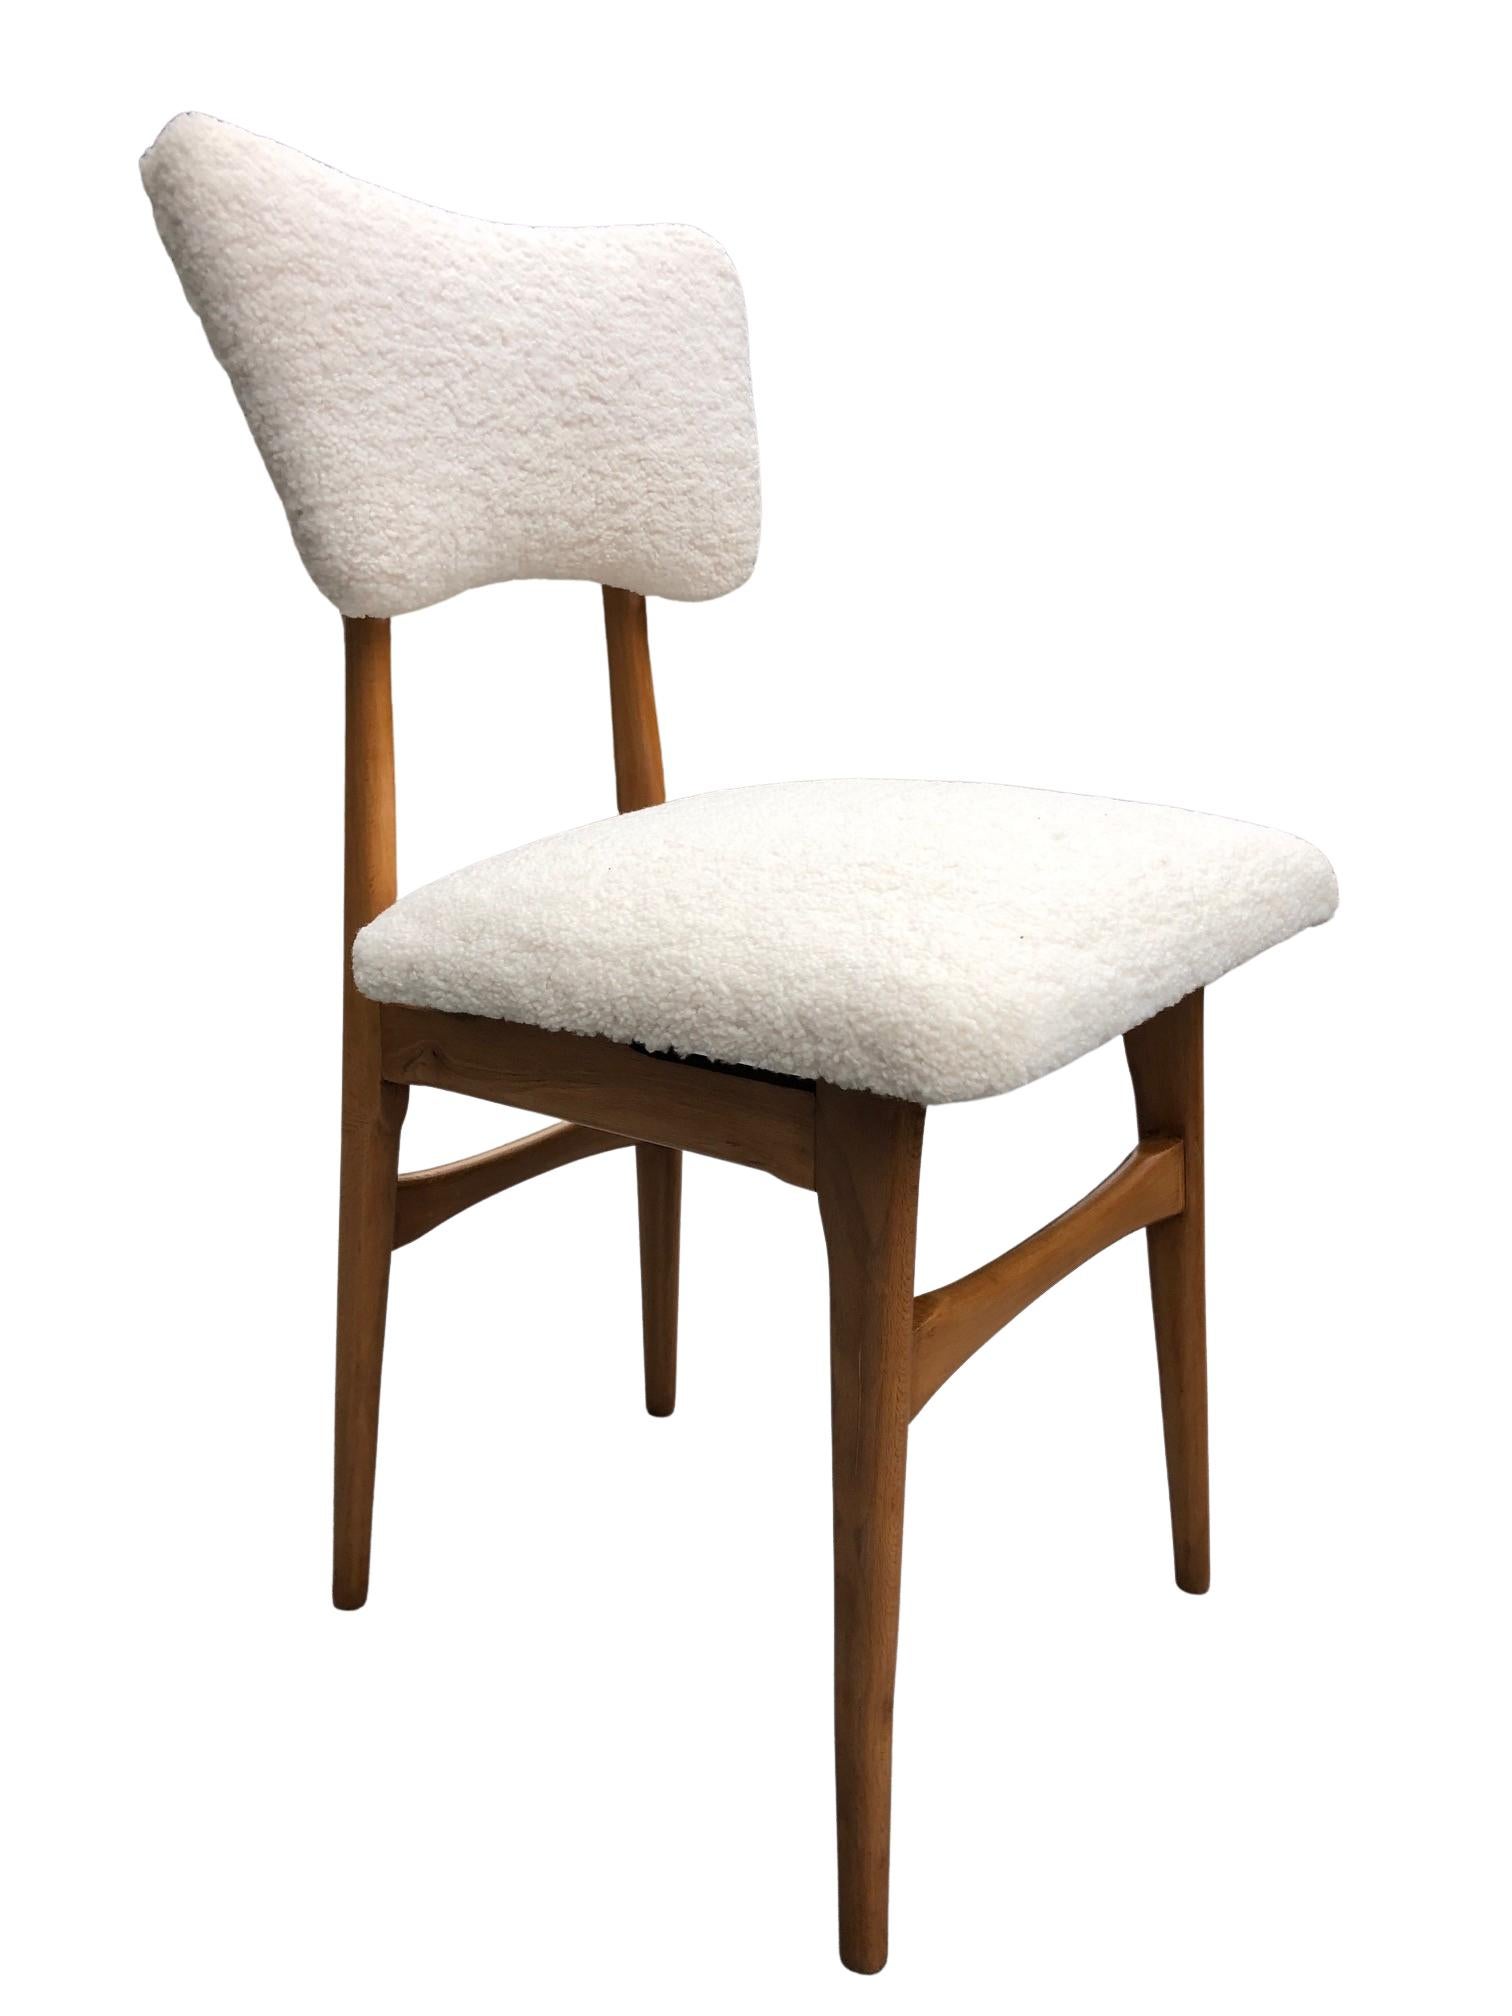 Midcentury Cream Bouclé and Wood Dining Chair, Europe, 1960s For Sale 8